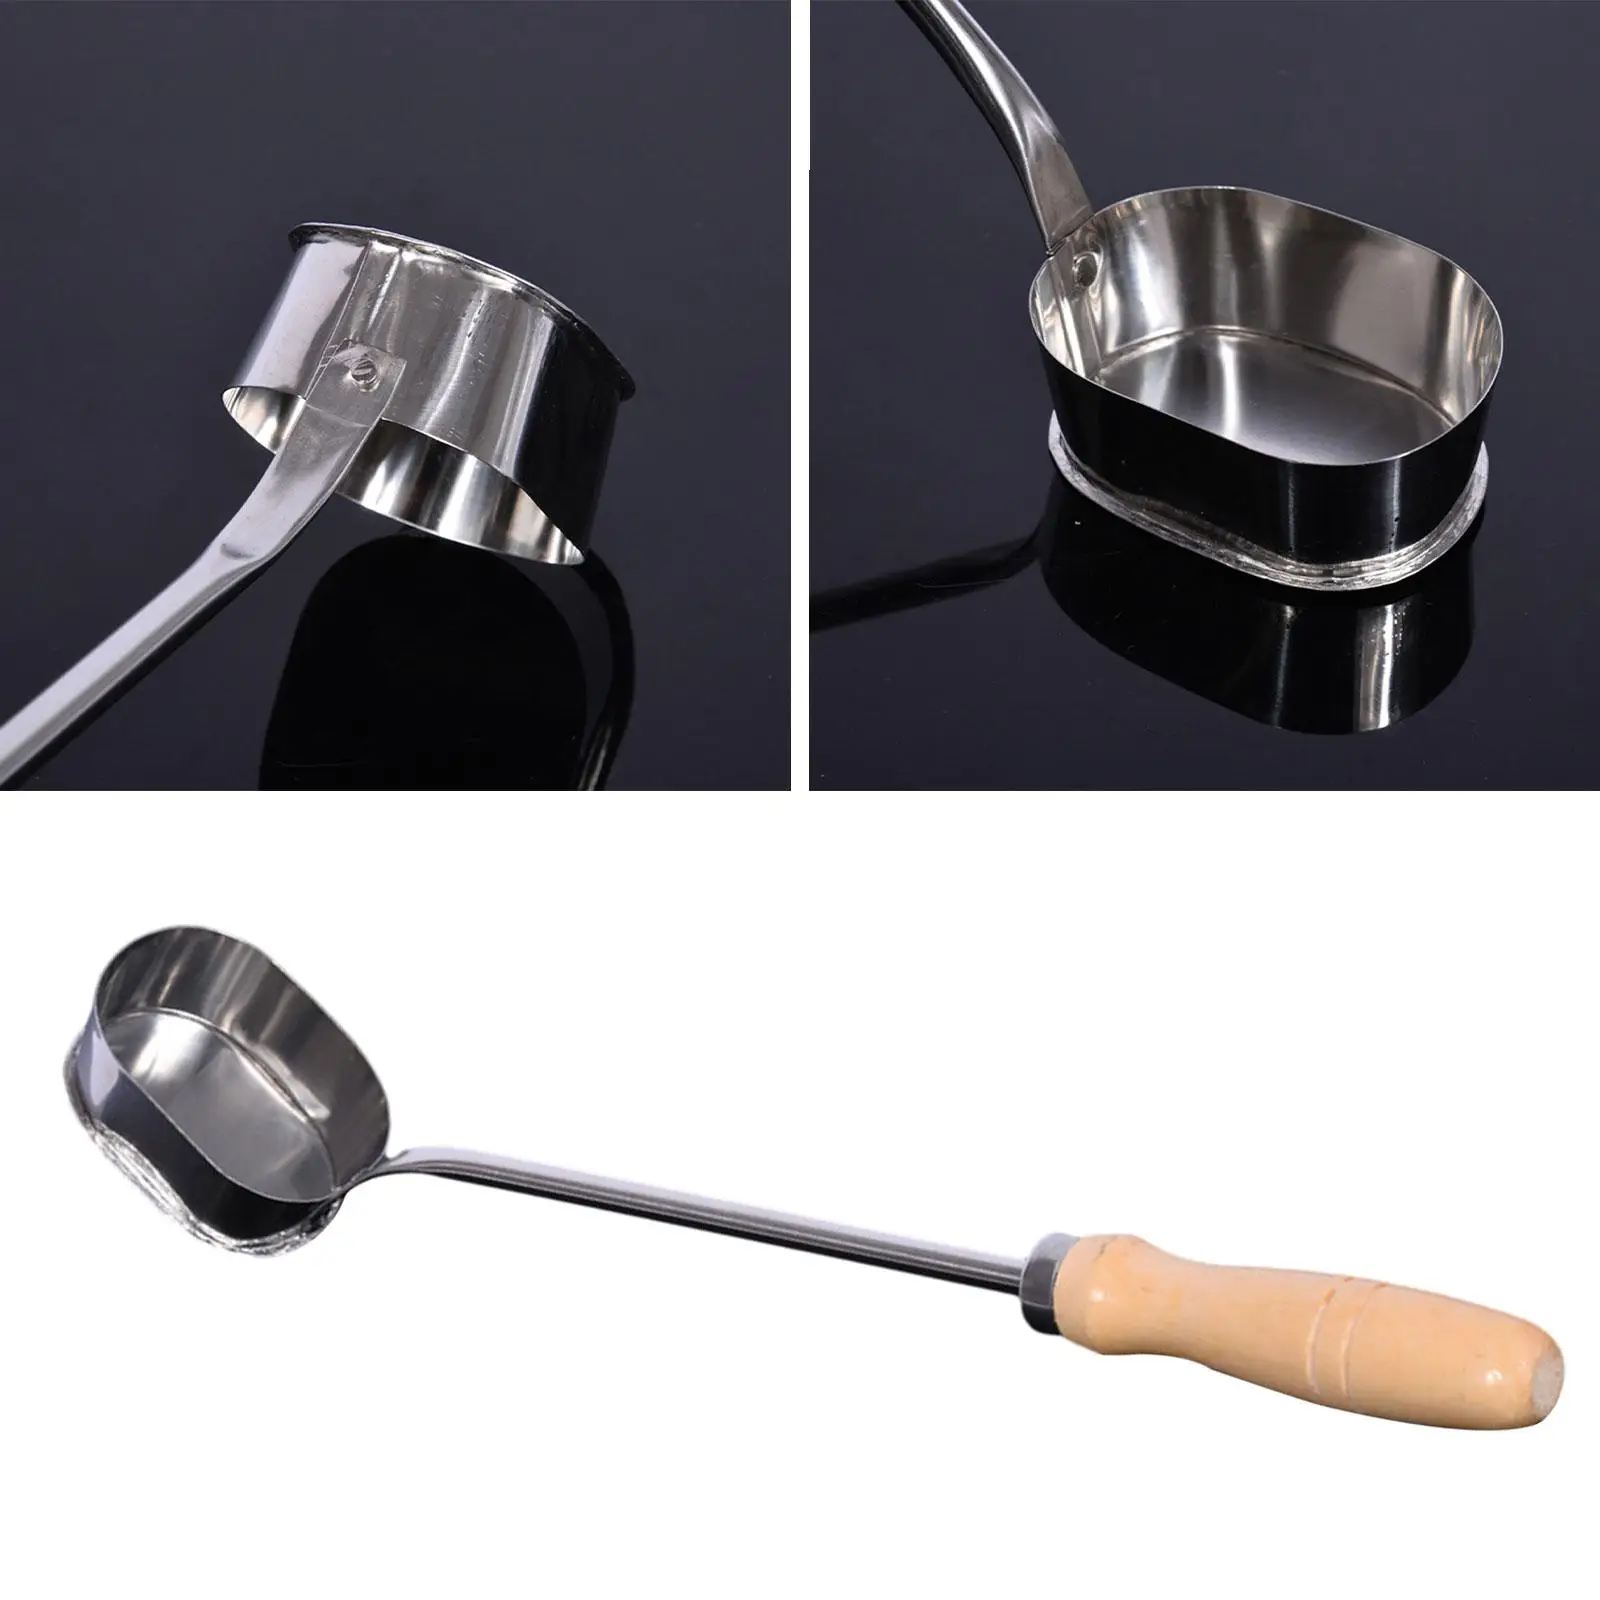 Meat Patty Maker Stainless Steel Comfortable Handle Durable Easy to Clean Portable Manual Fried Meat Spoon Cooking Tools